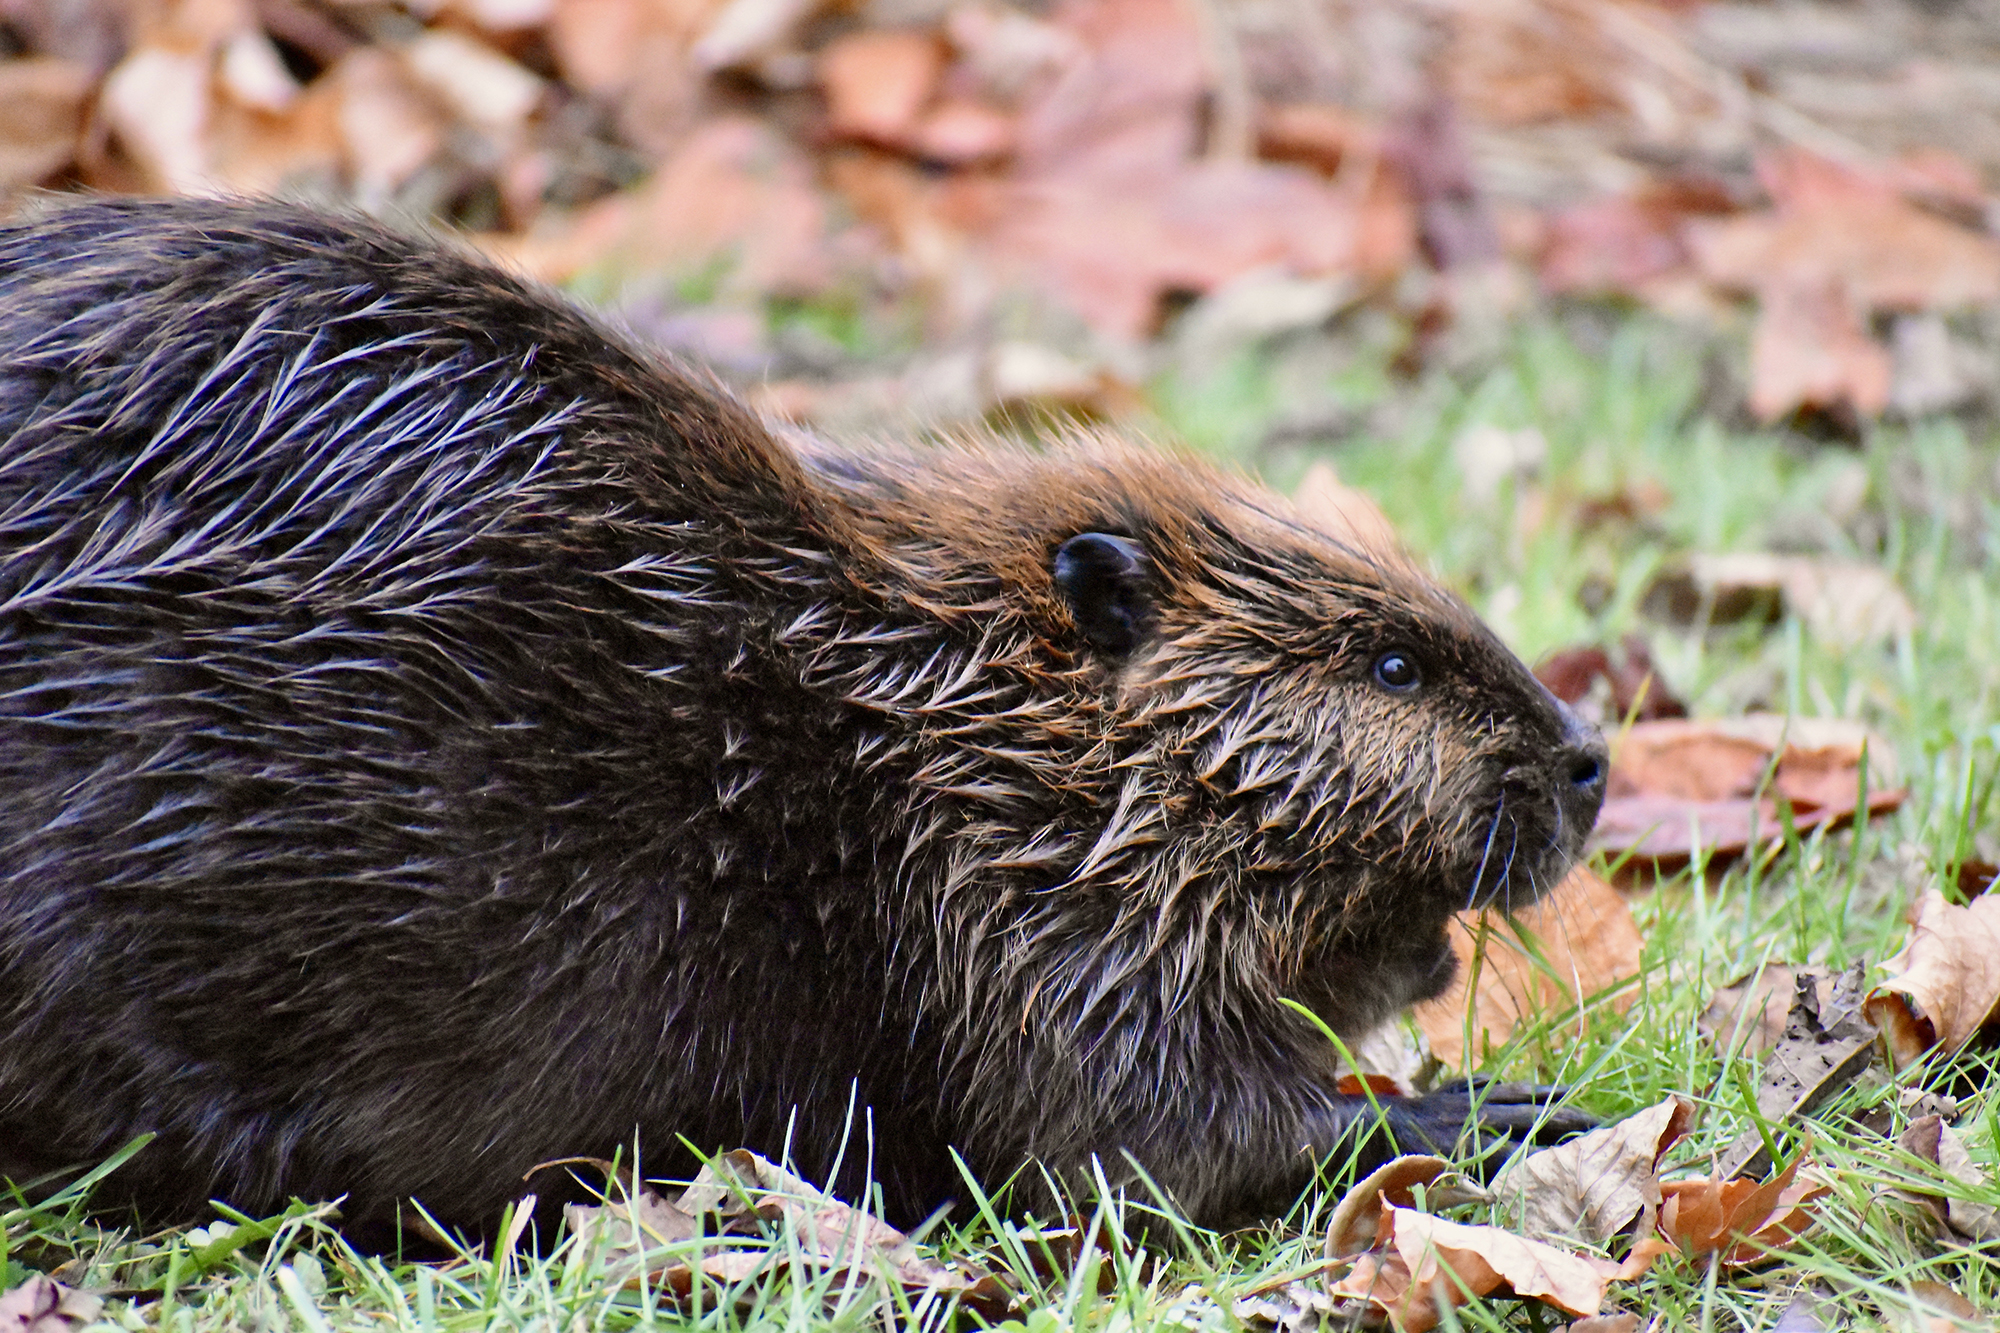 A beaver crouches on the ground amid a pile of leaves.